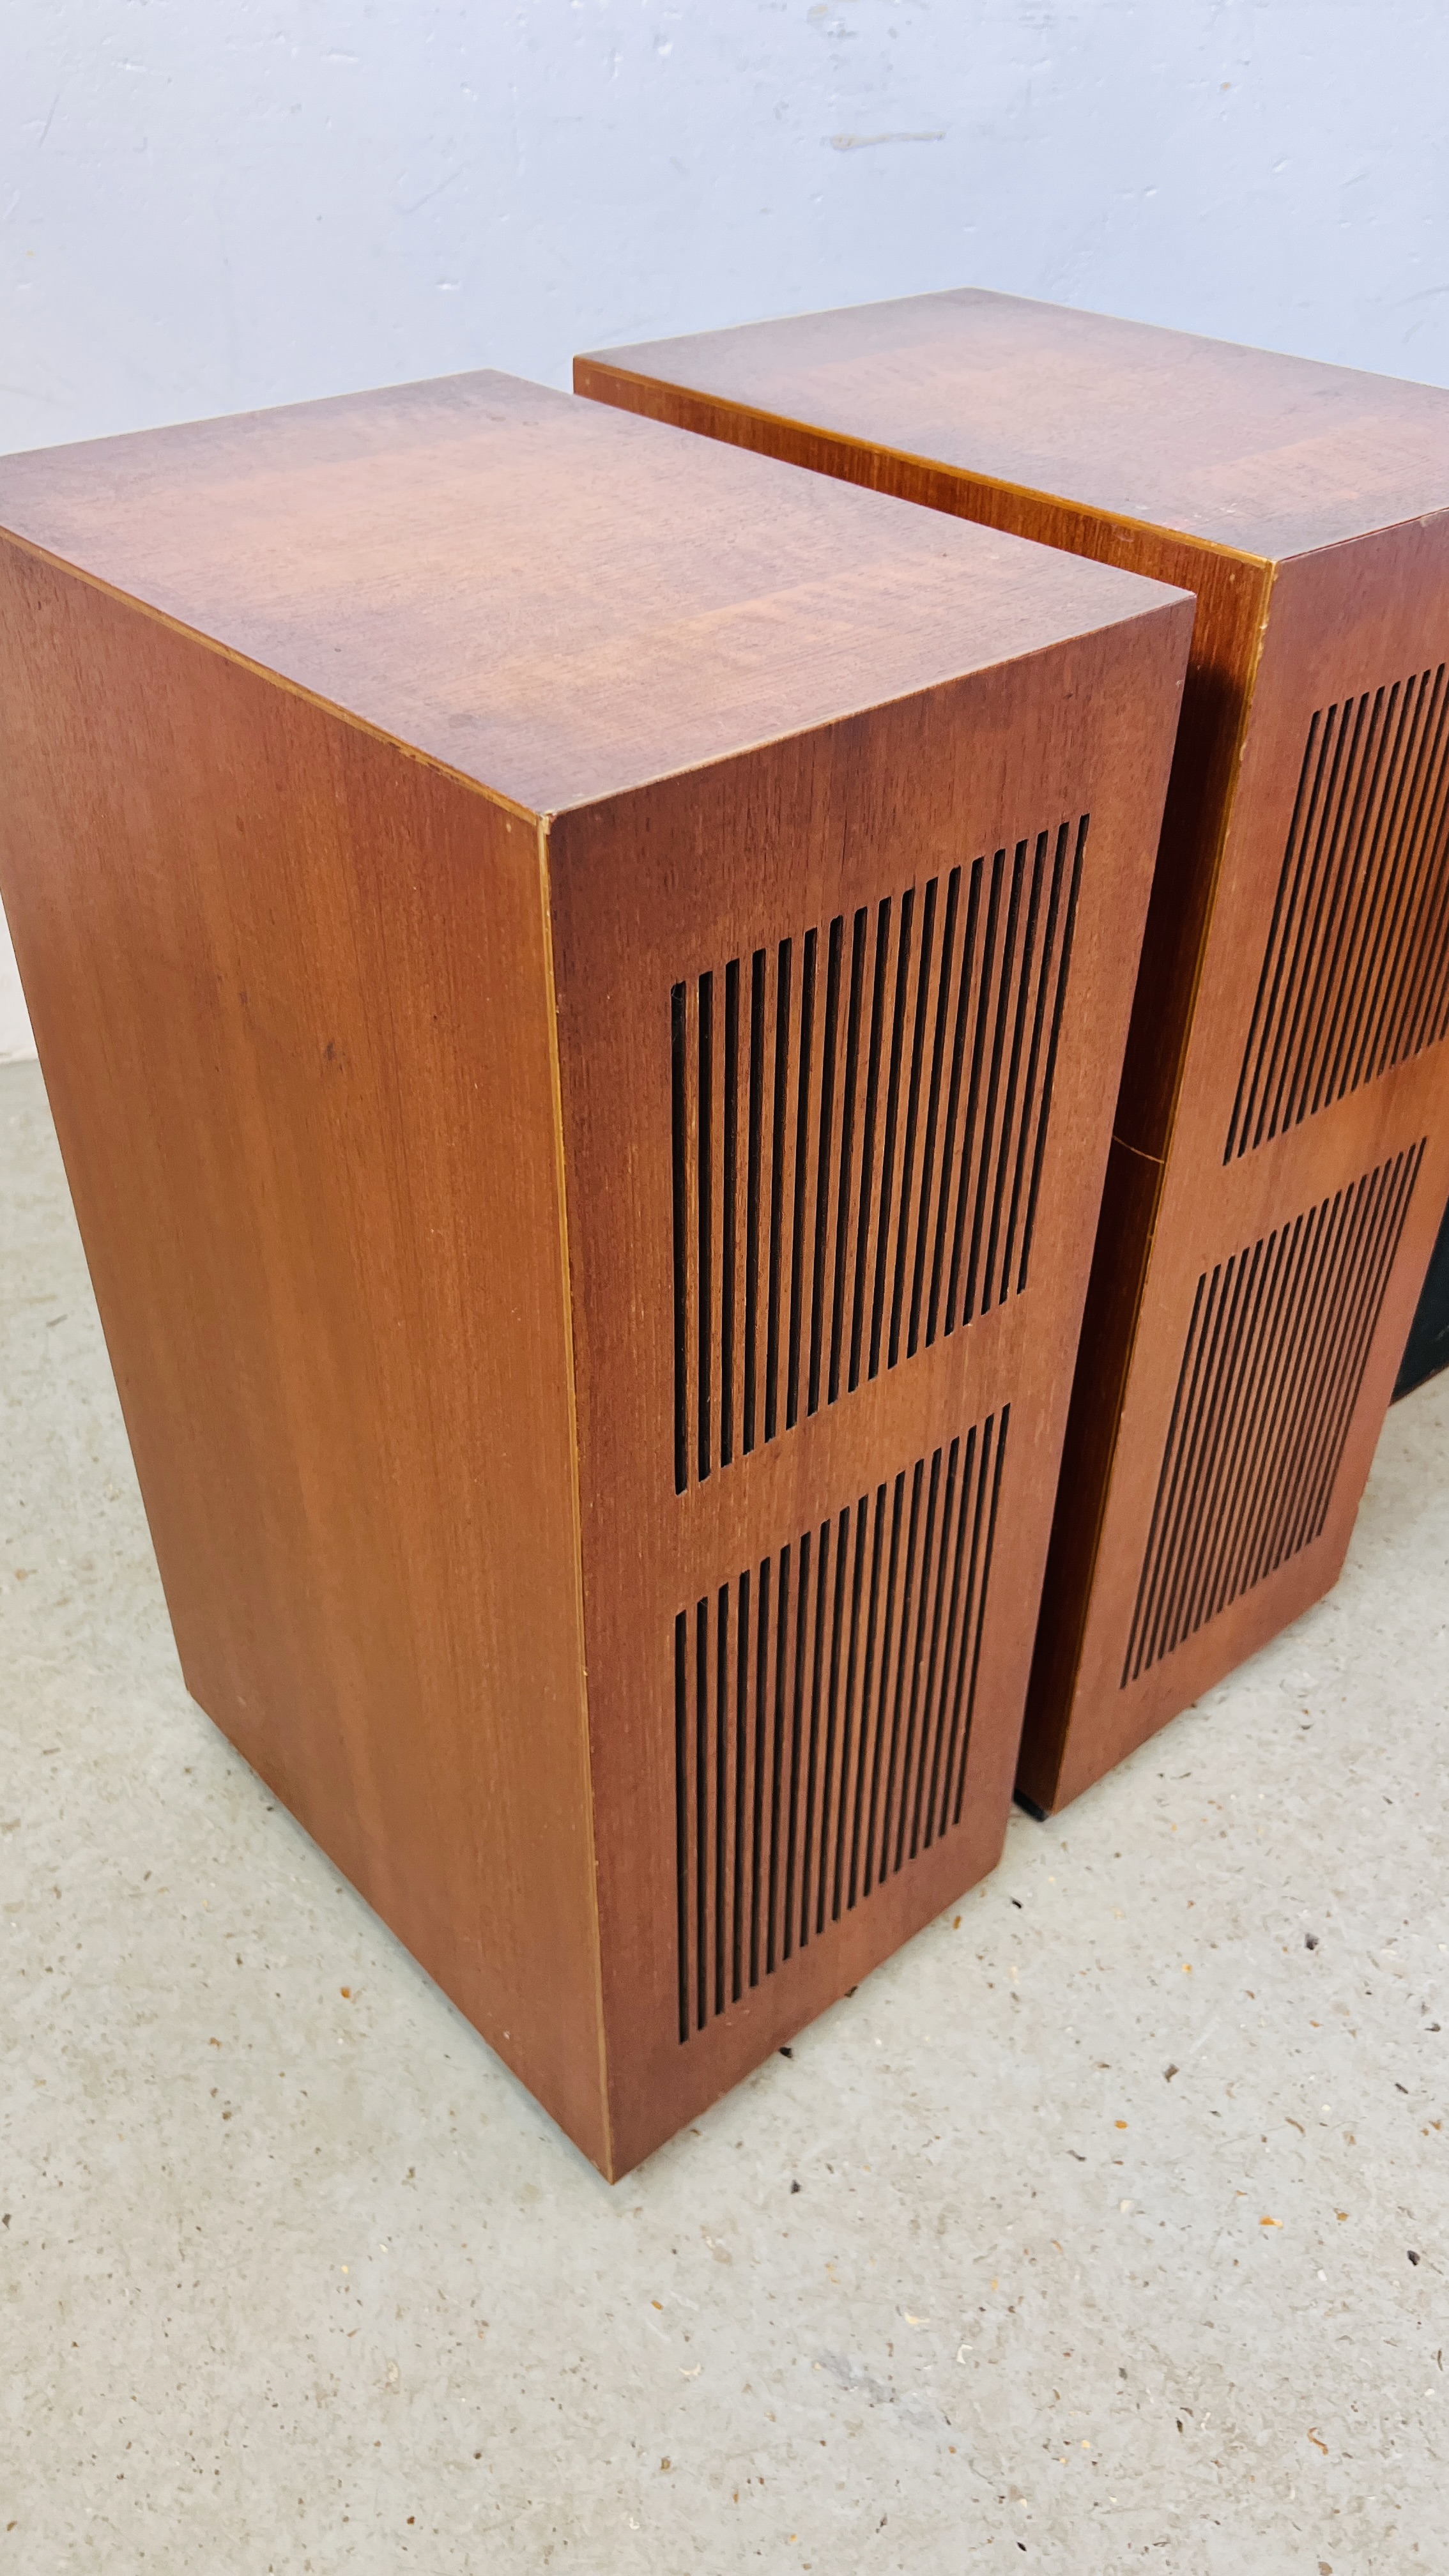 A PAIR OF HMU 2406 SPEAKERS ALONG WITH A PAIR OF VINTAGE WOODEN CASED DYNATRON LS200 SPEAKERS - - Image 7 of 10